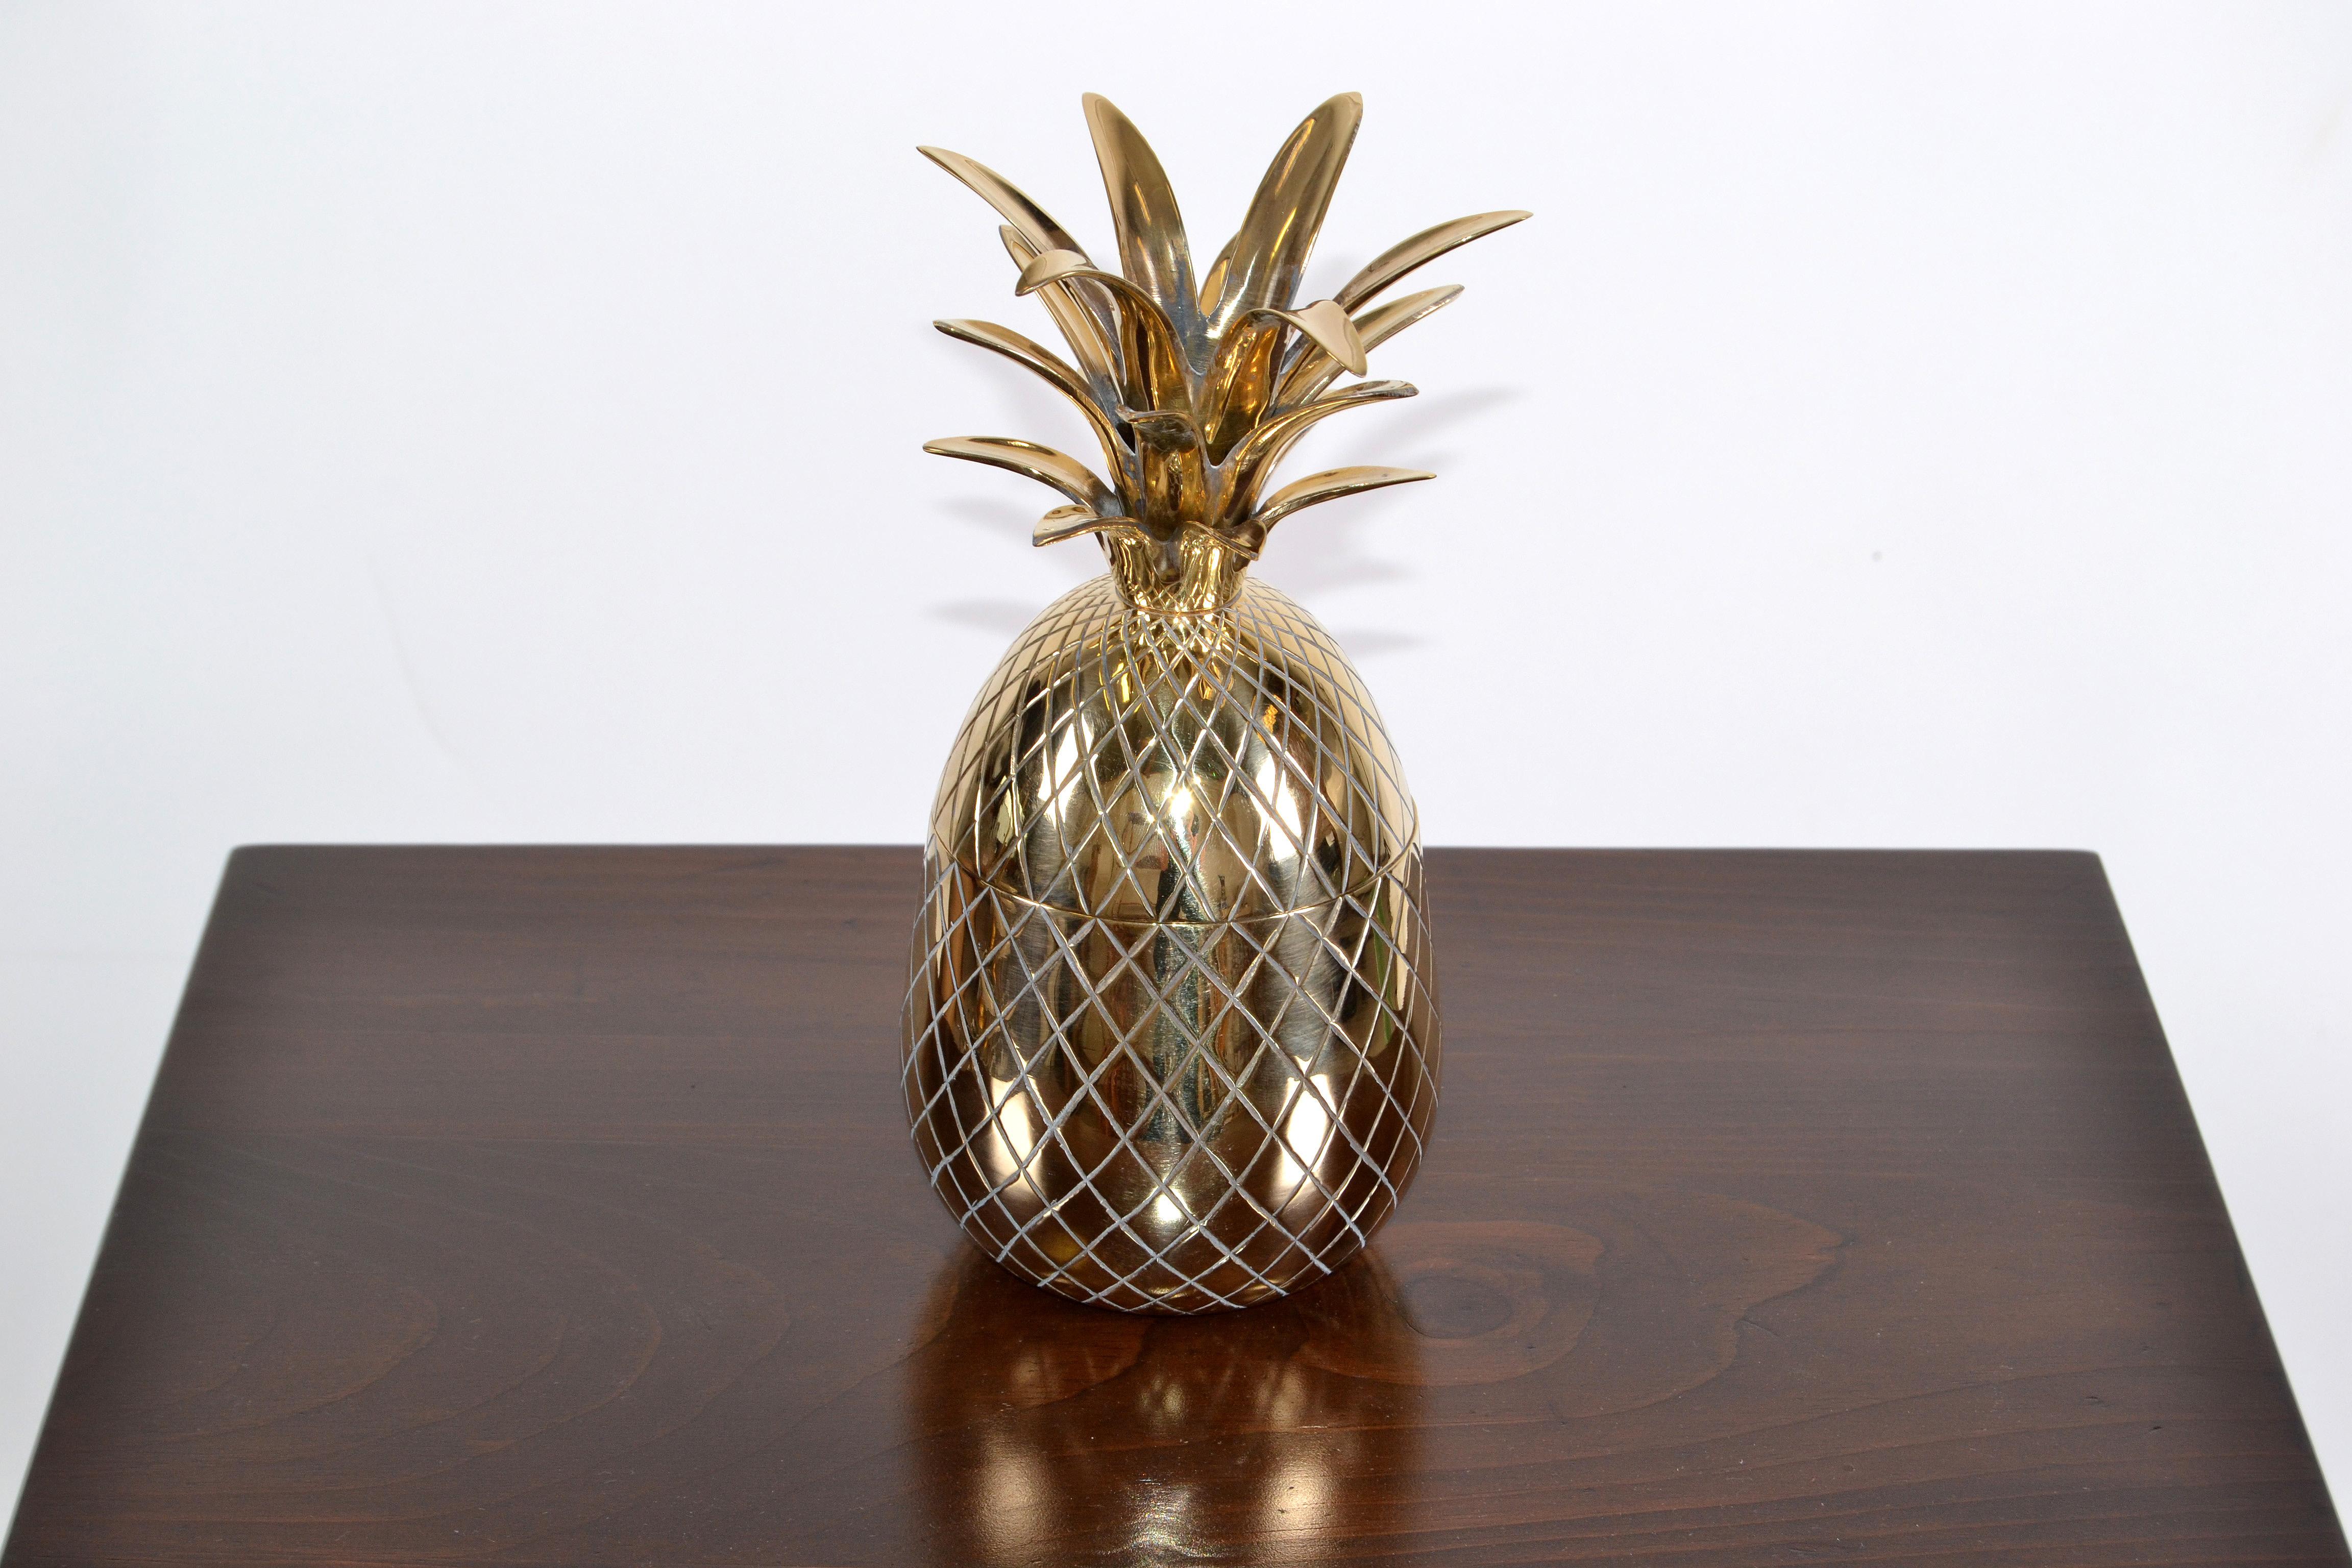 20th Century Mid-Century Modern Large Brass Pineapple Pina Colada Cup Jar with Lid 1970 For Sale